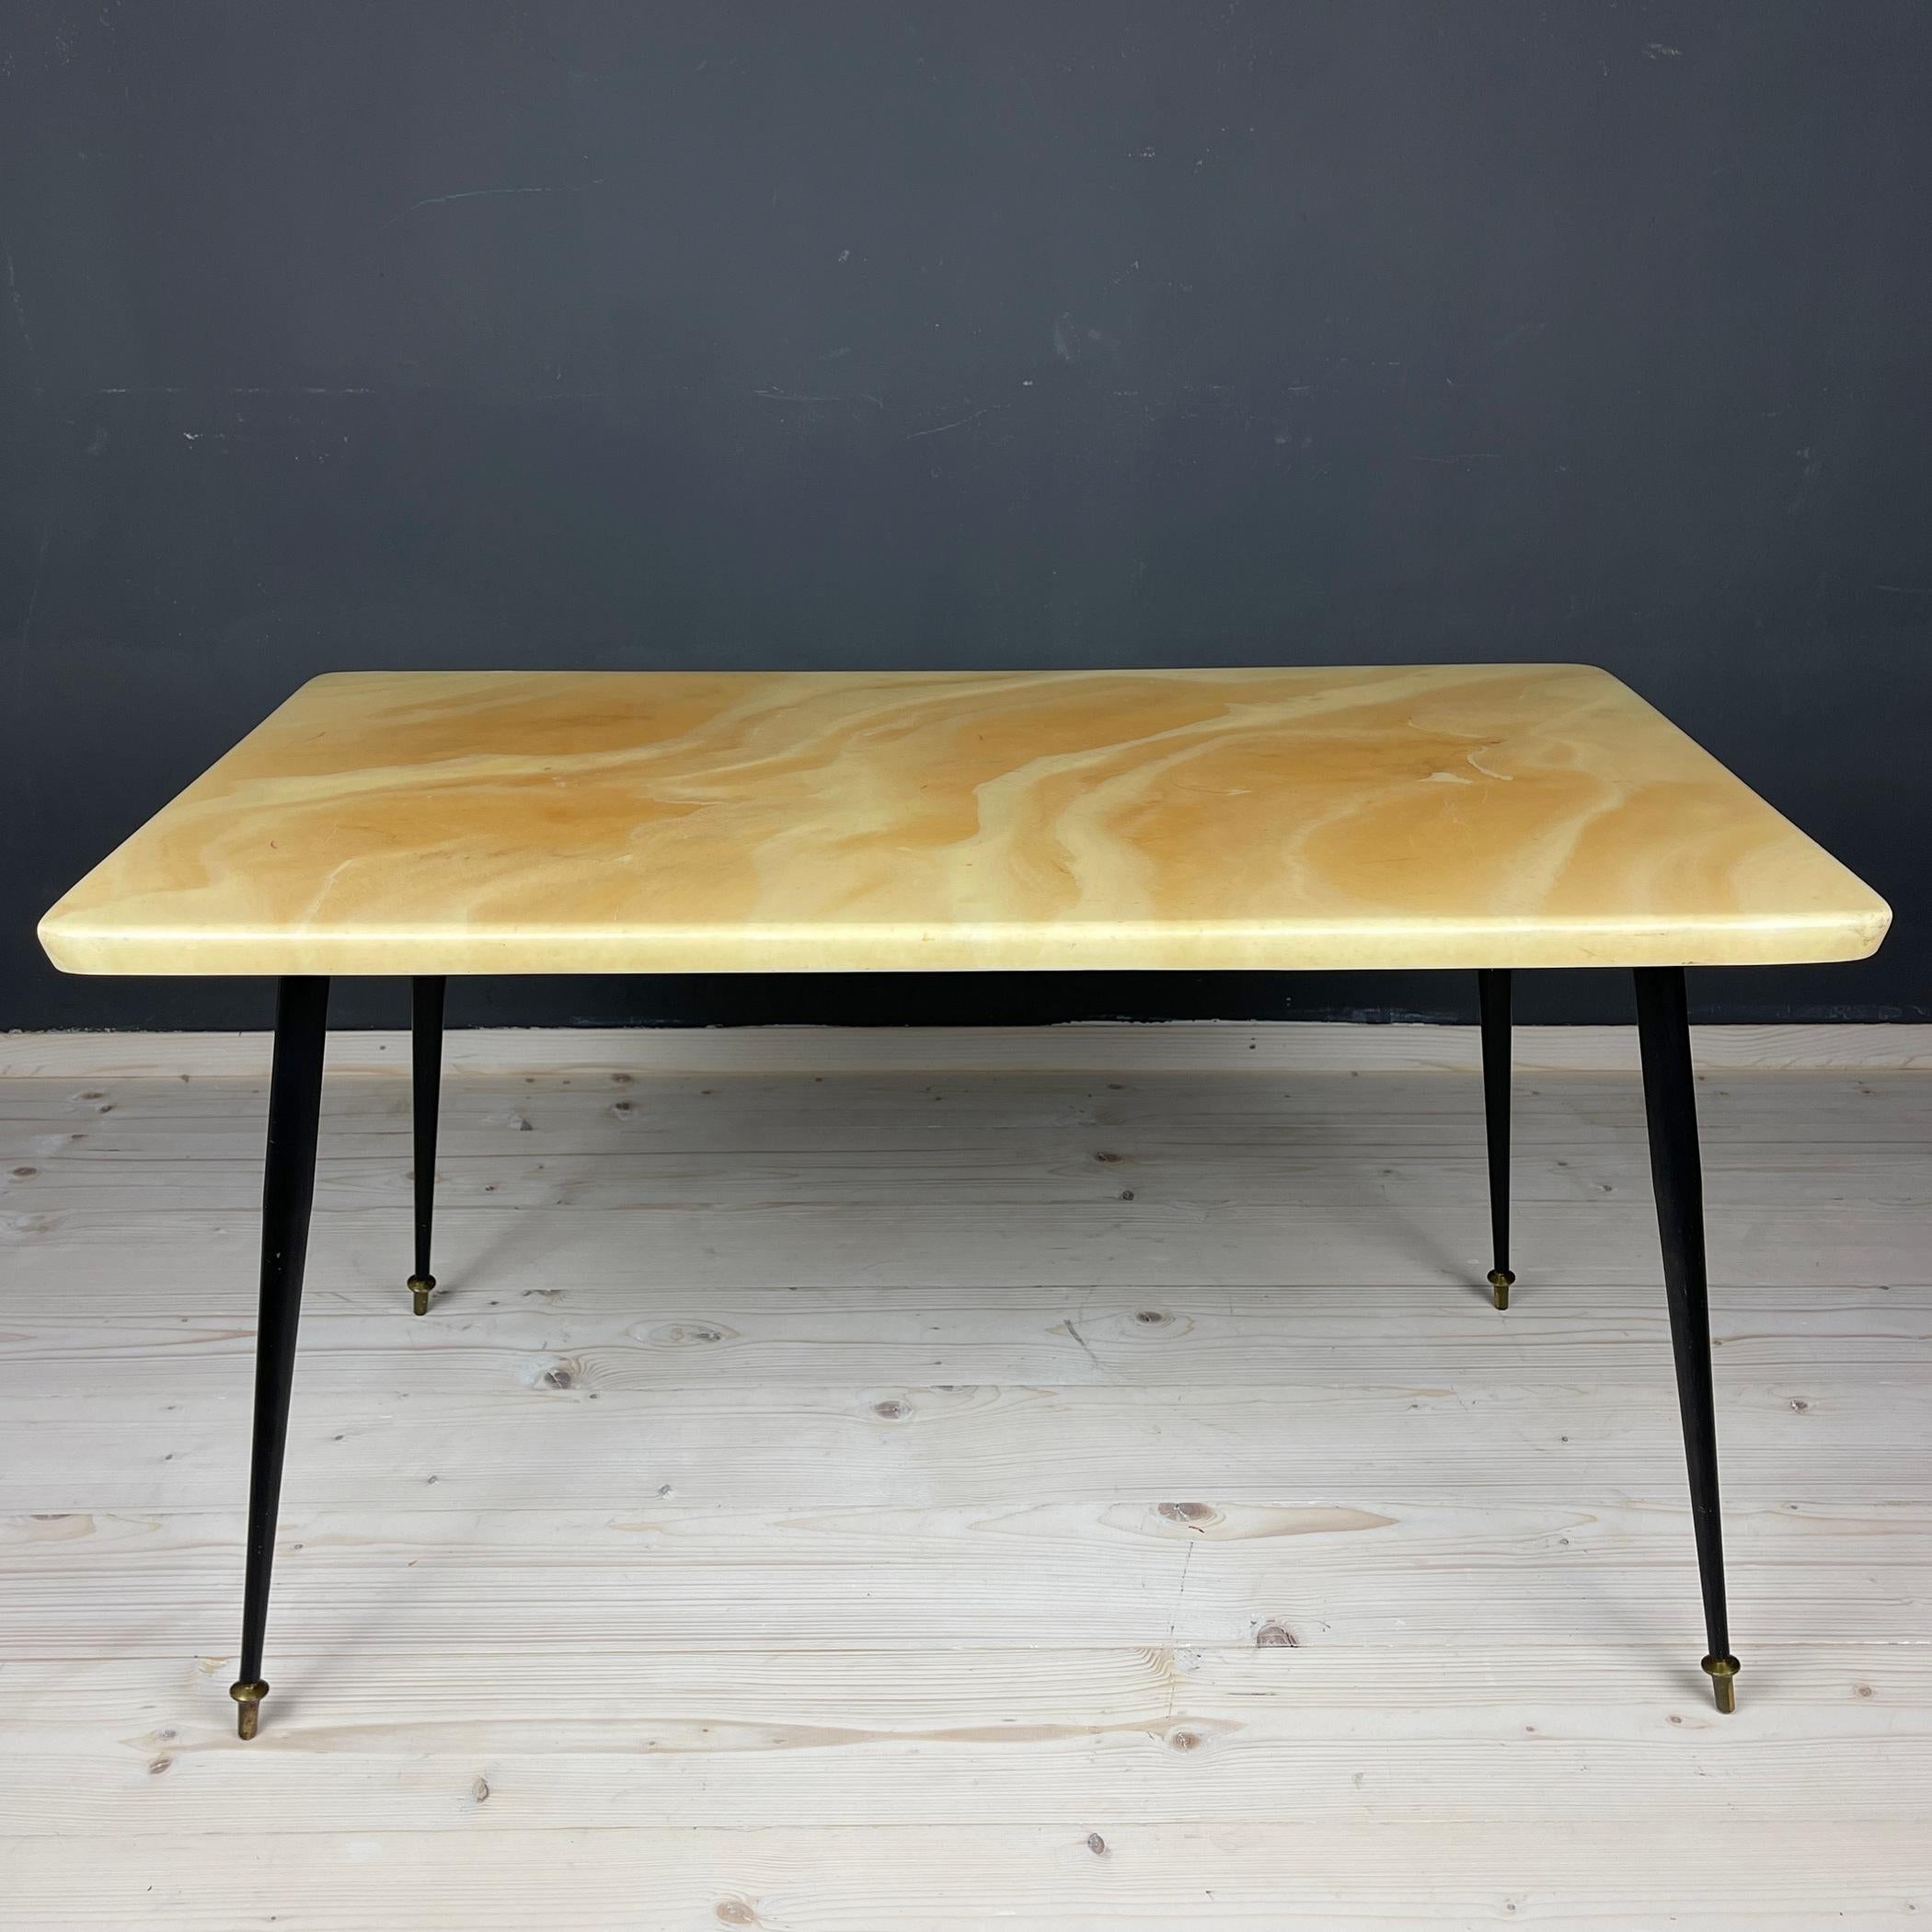 Vintage beautiful coffee table made in Italy in the 1950s. Very comfortable to use. You can place drinks, books, a phone, or a purse on it. It is also a beautiful vintage decor piece. It is as usable as it is good-looking, so it is perfect for every